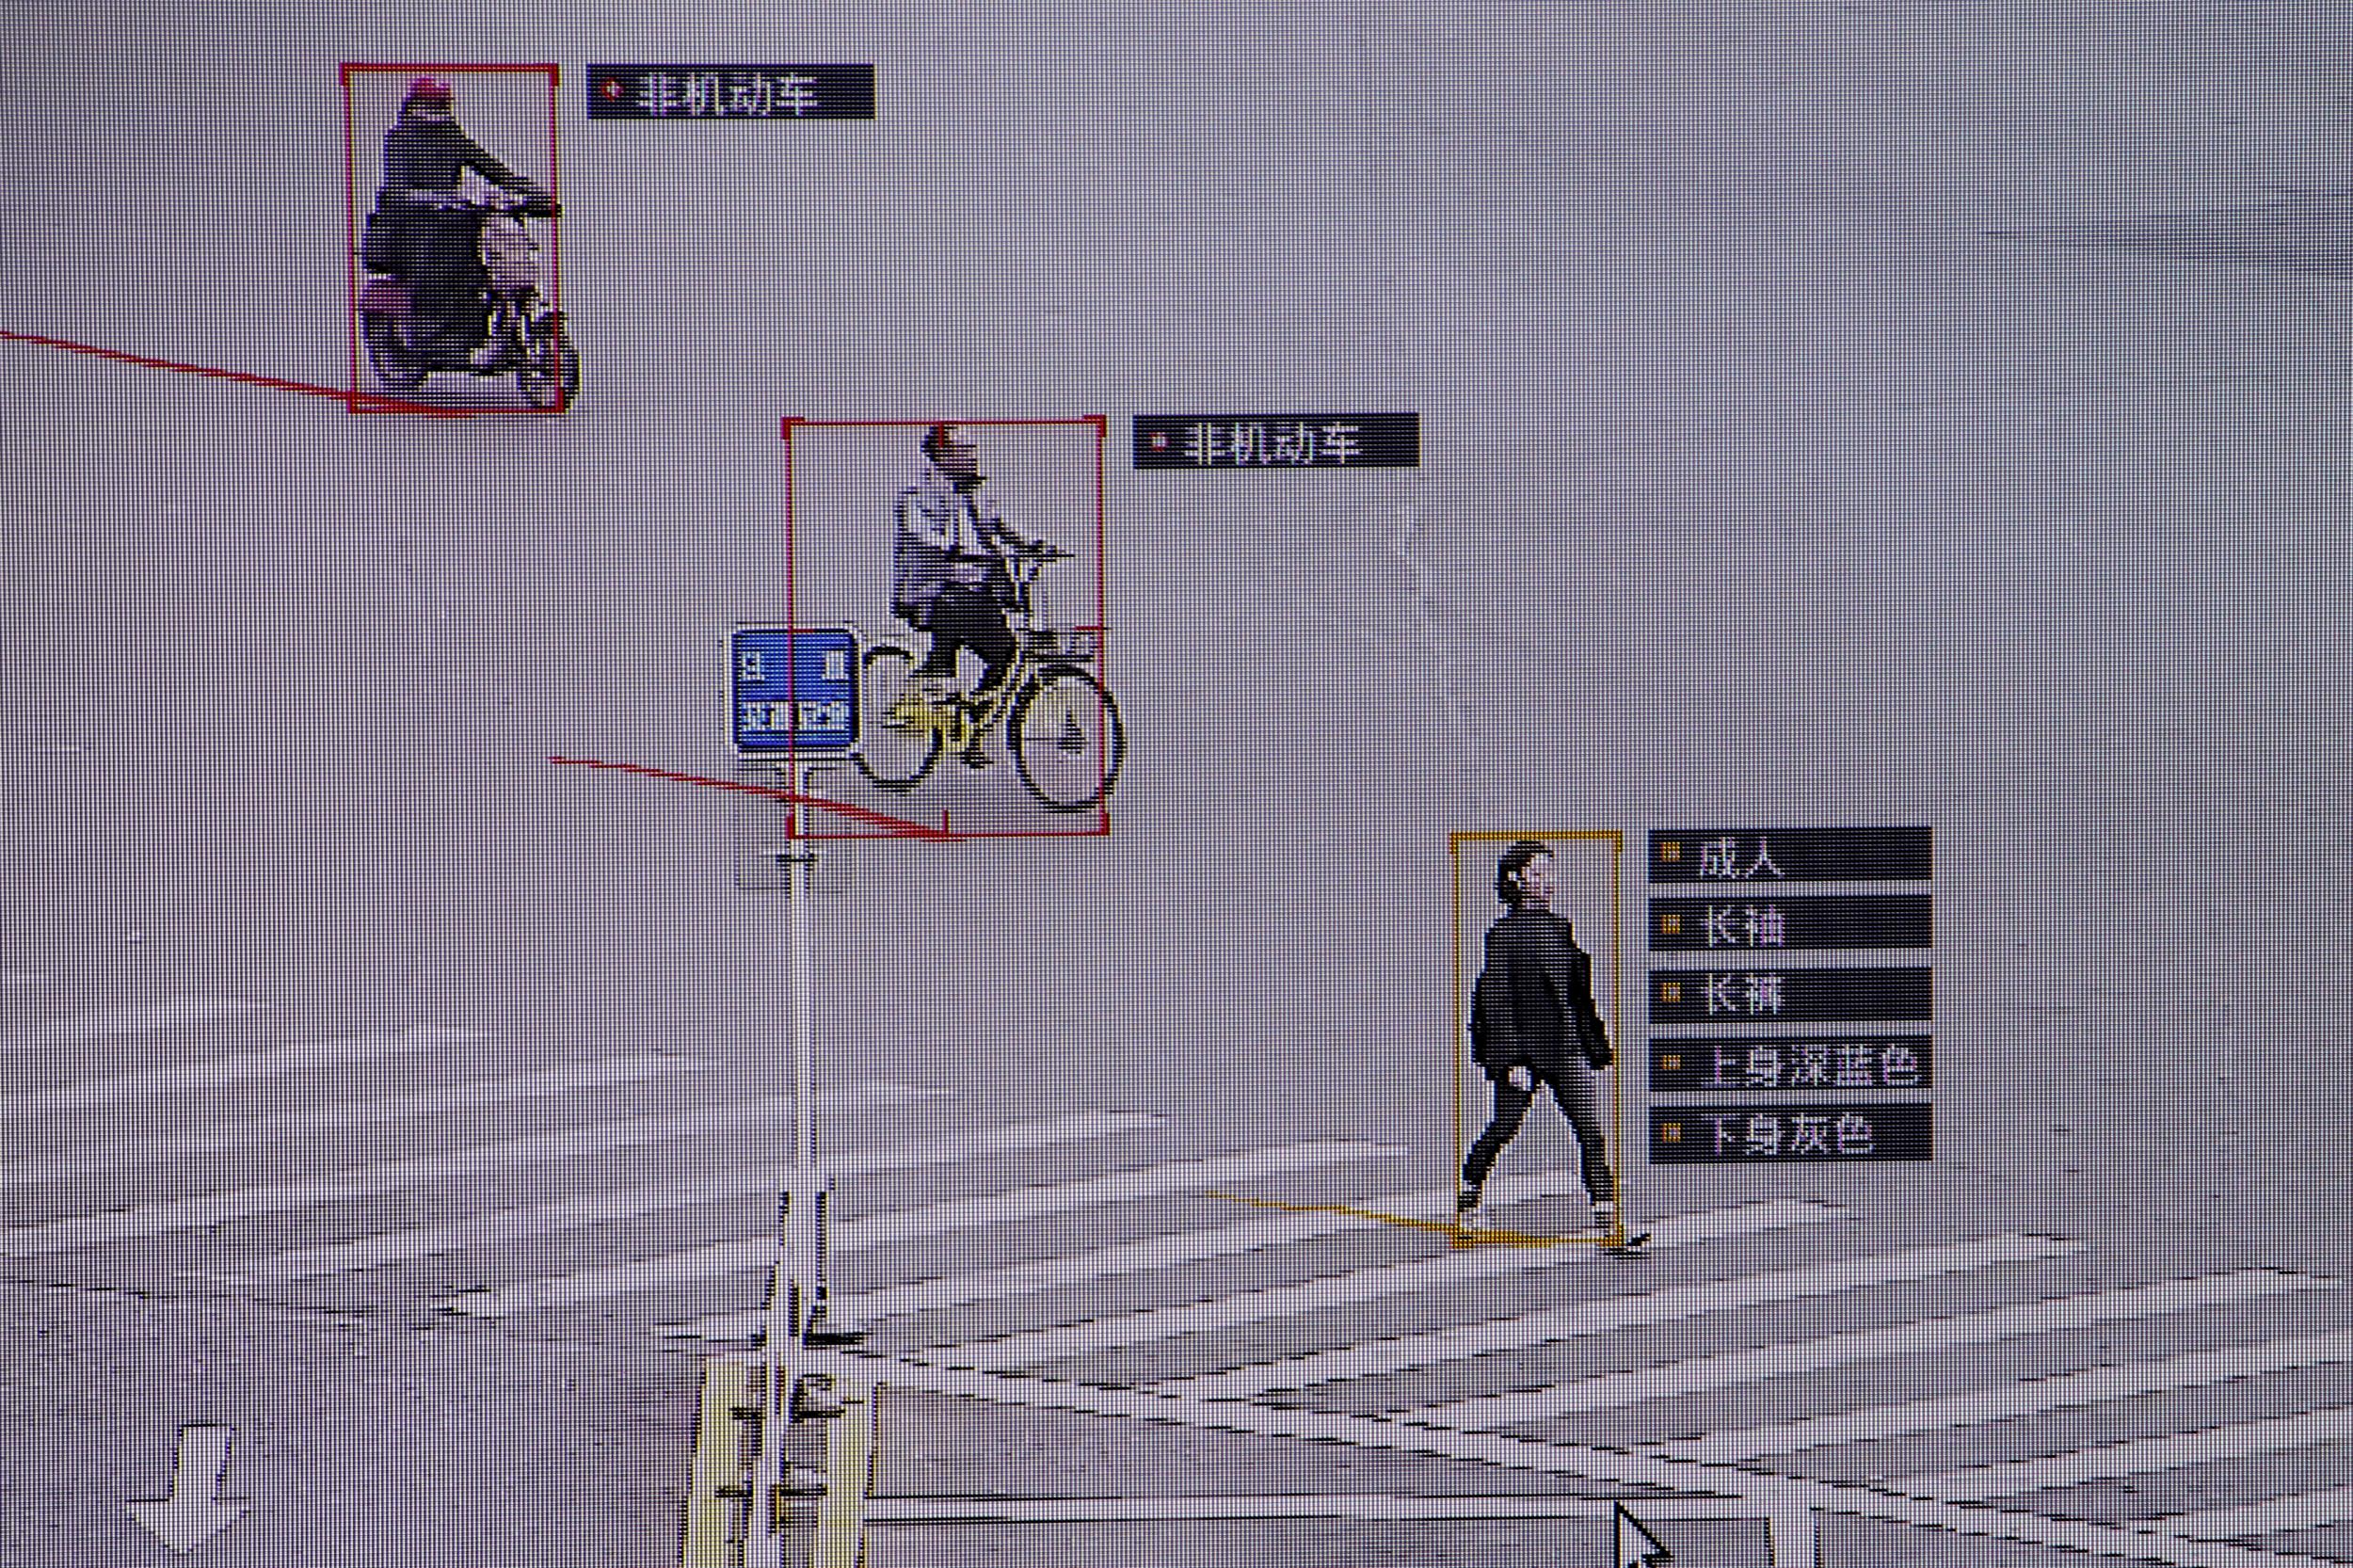 Facial recognition technology in China, such as this software by SenseTime, has caused controversy for enabling an all-pervading surveillance state.